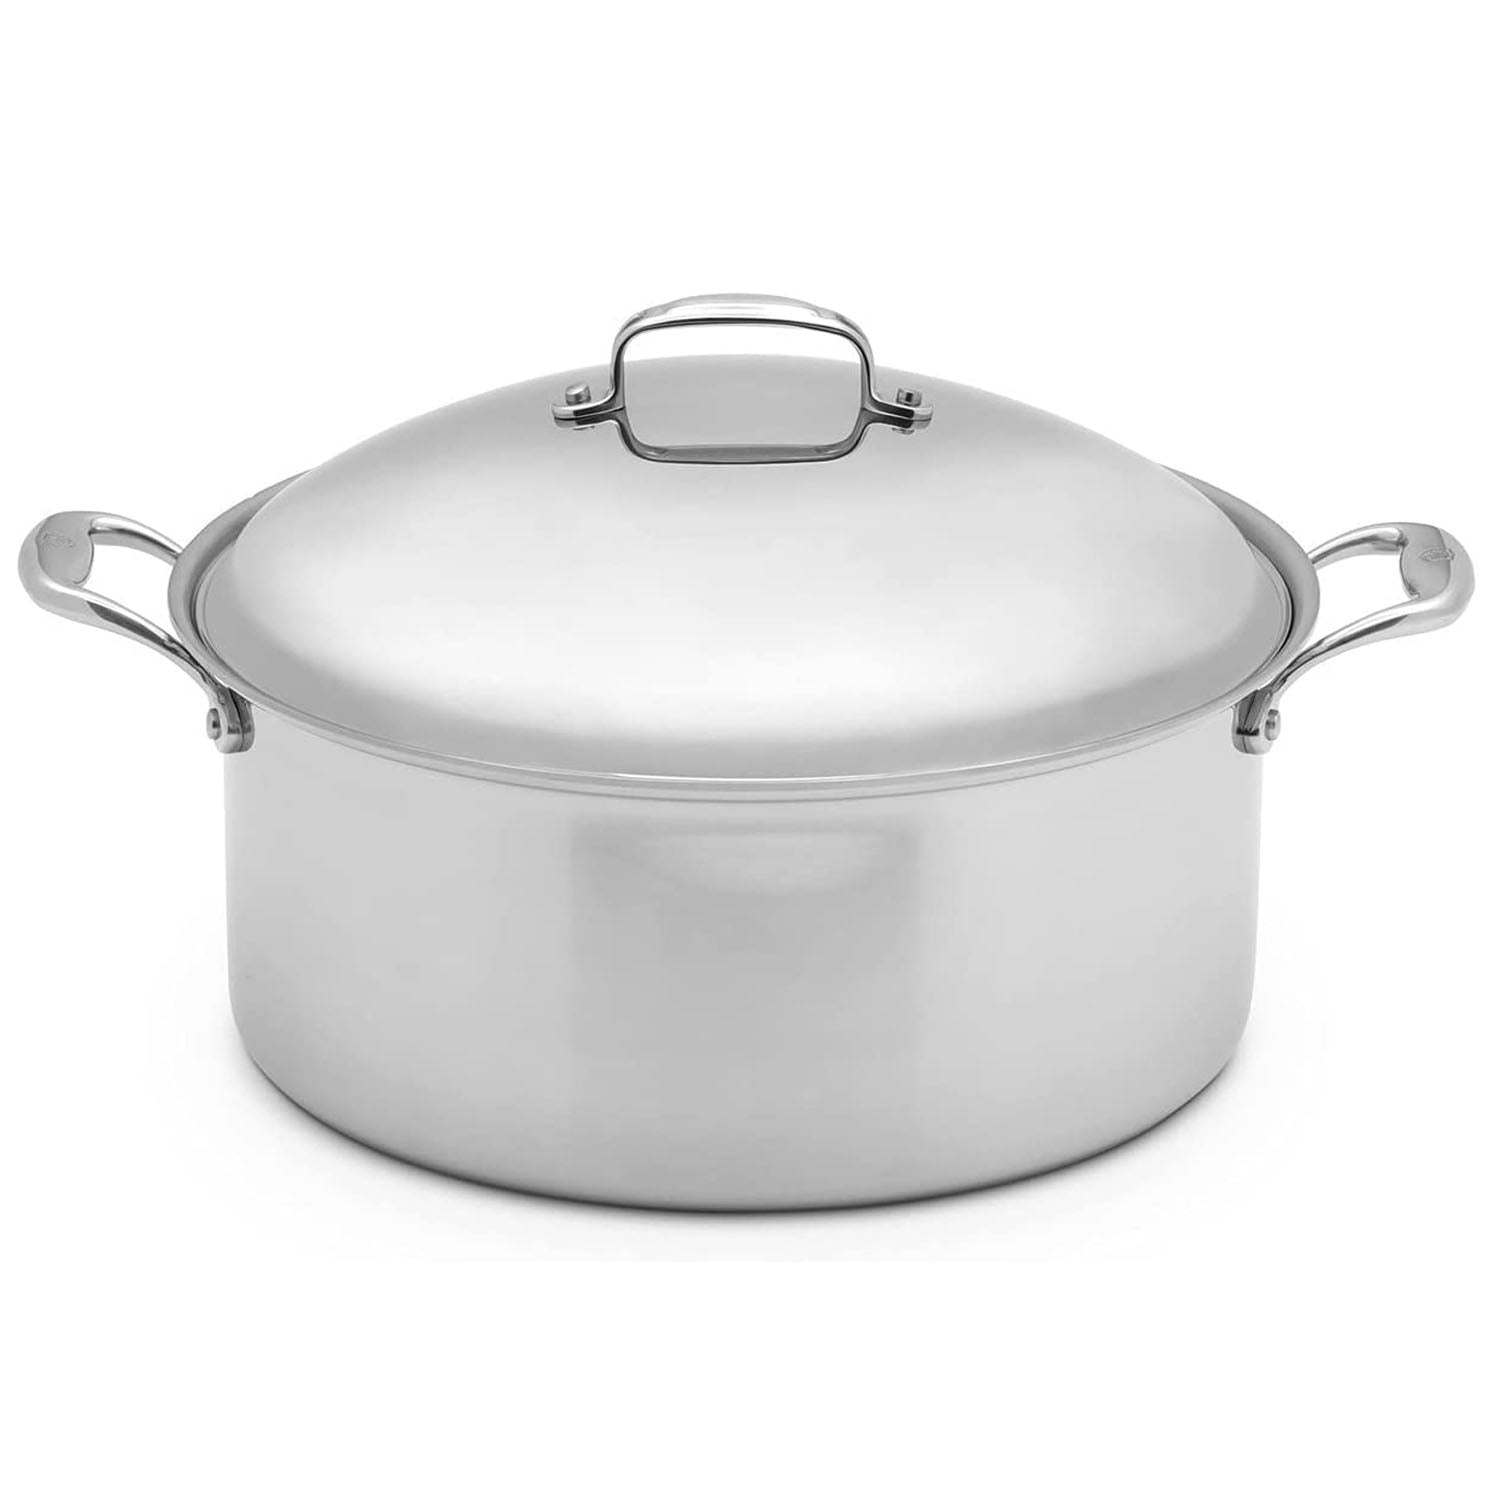 Heritage Steel Titanium Series 5 Quart Sauce Pot with Lid, 5-Ply Clad  Stainless Steel Cookware with 316Ti, Made in USA